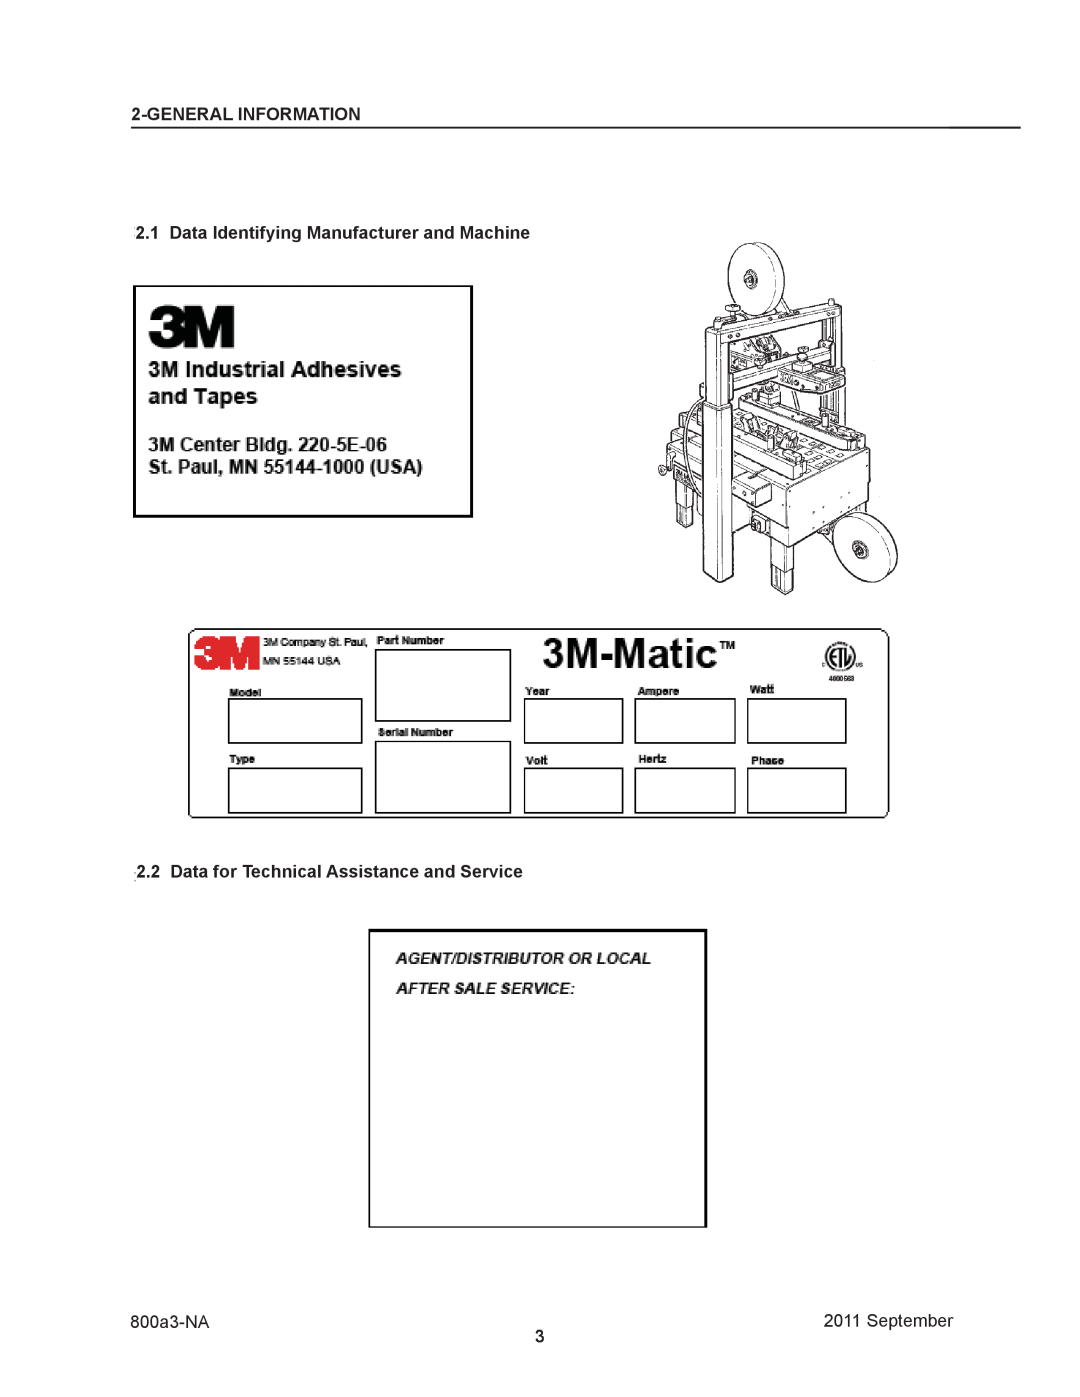 3M 800a3 manual Generalinformation, Data Identifying Manufacturer and Machine, Data for Technical Assistance and Service 